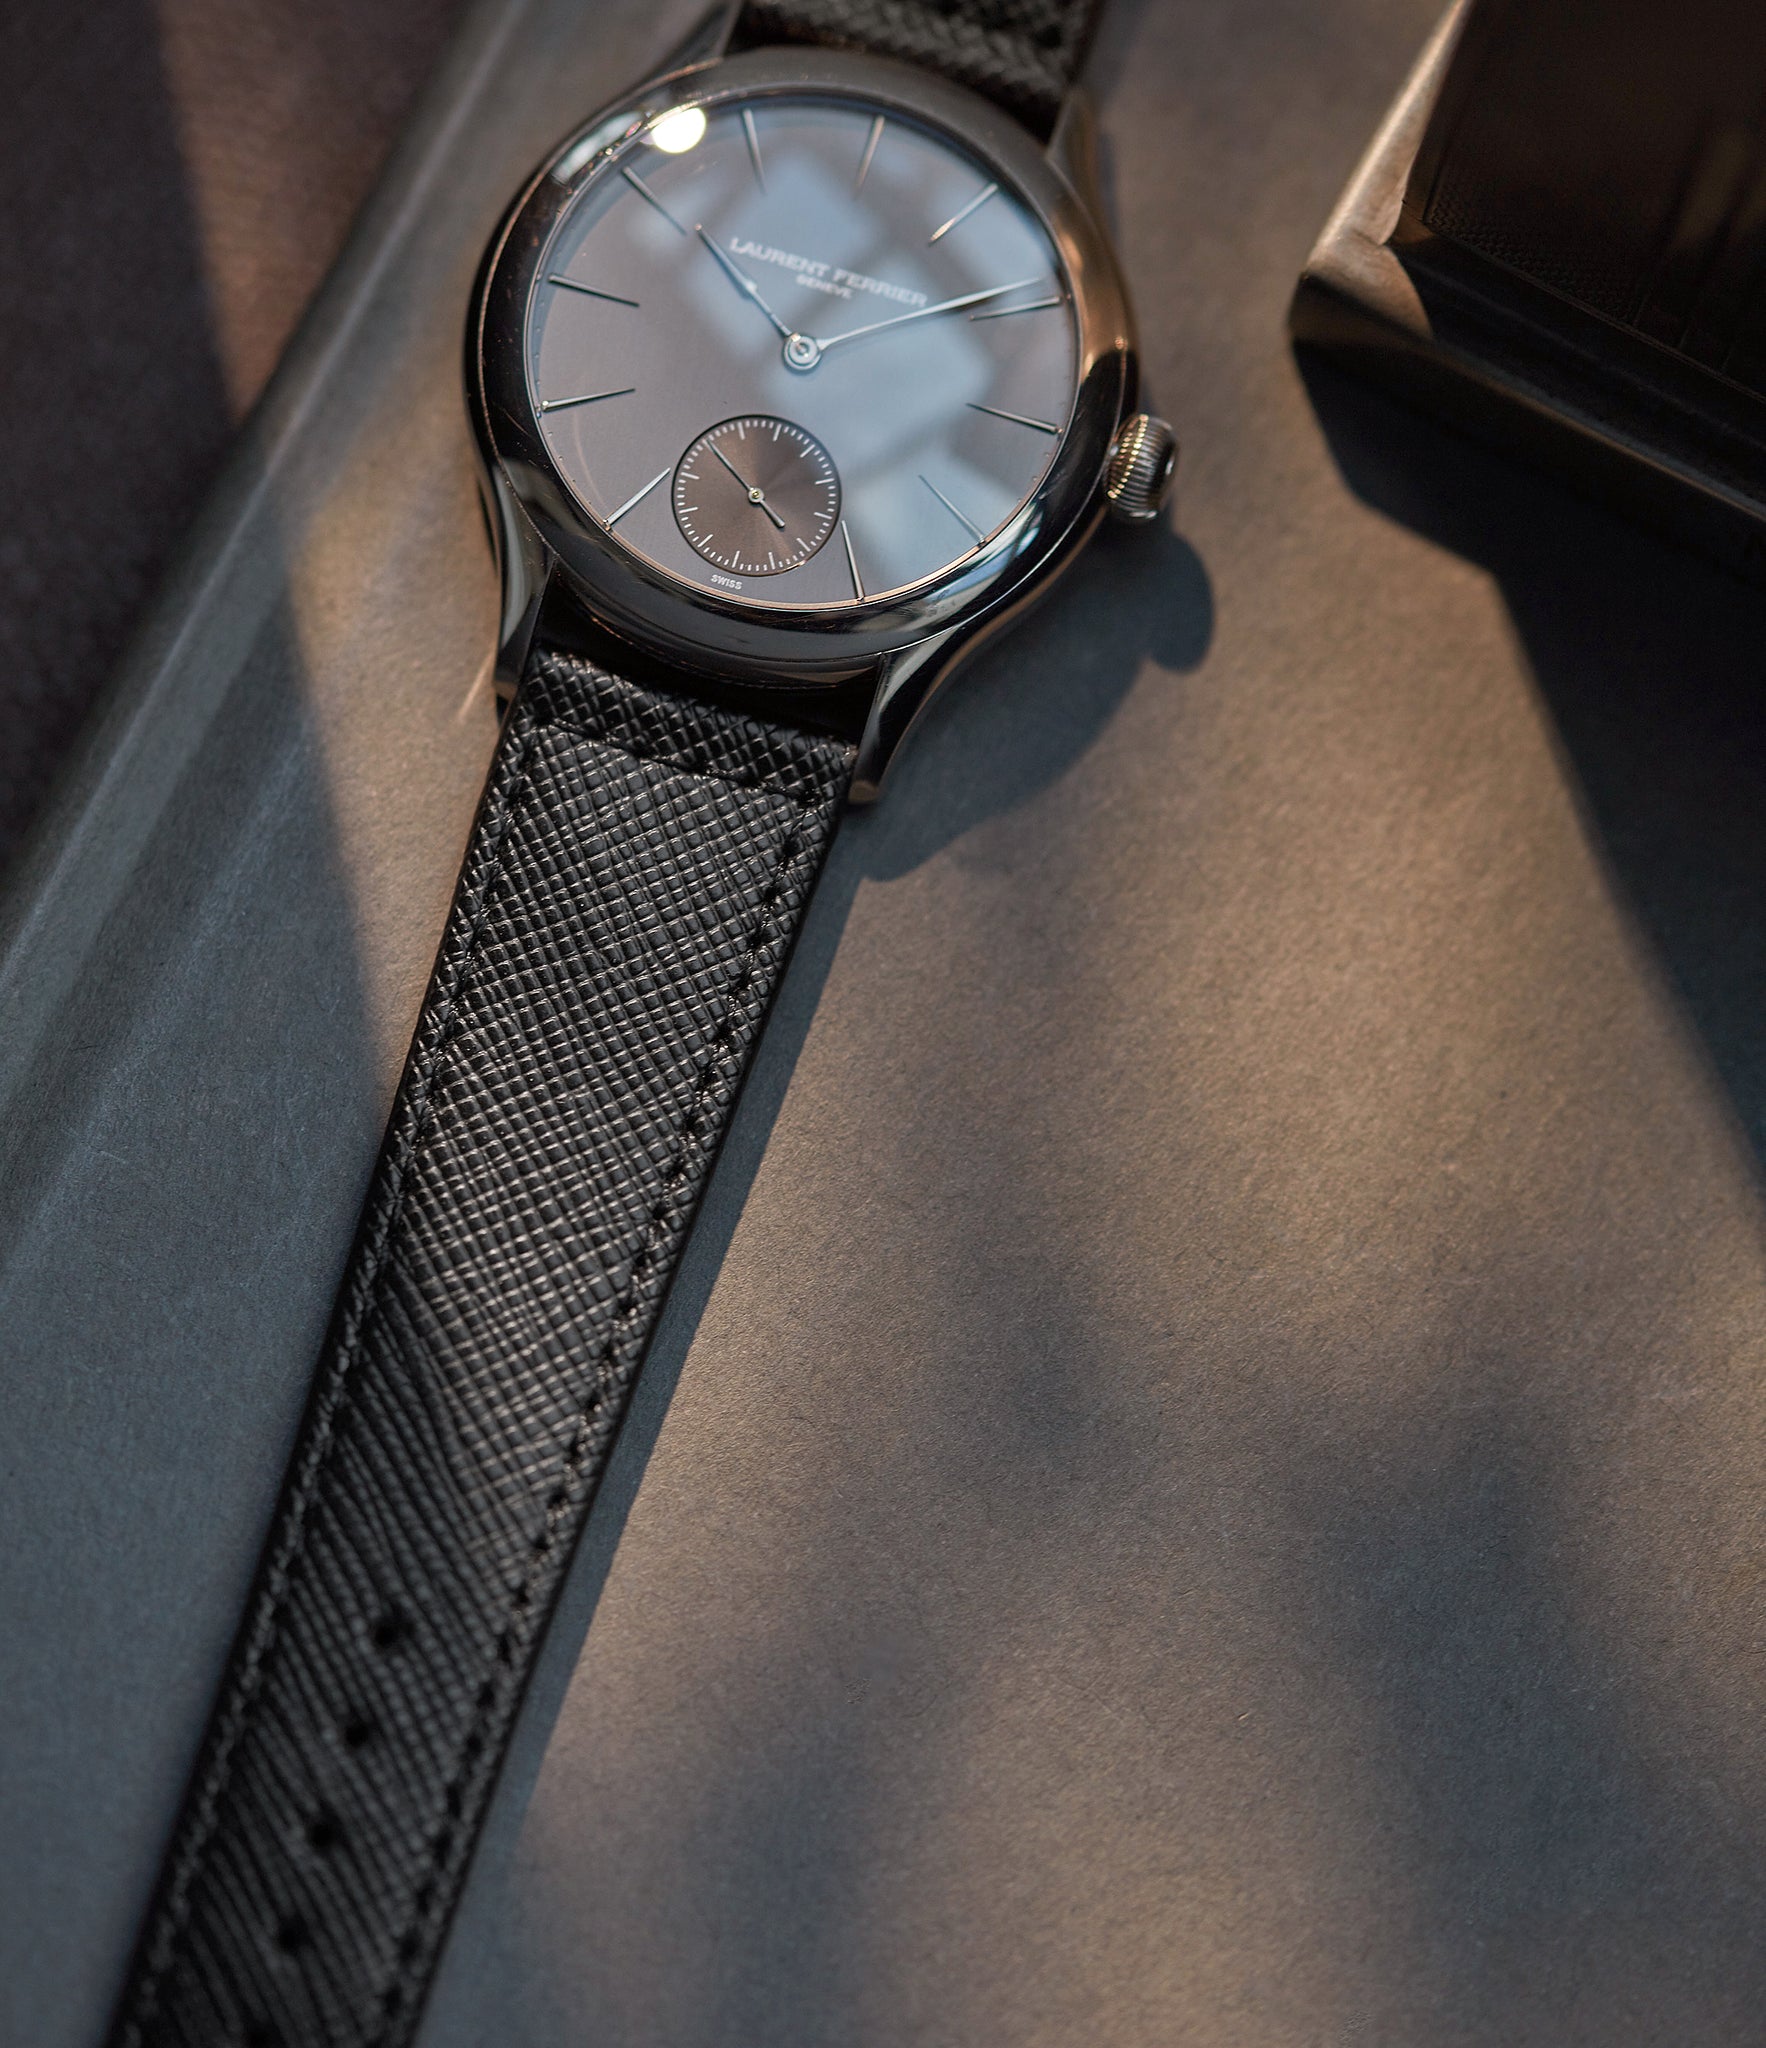 Buy saffiano quality watch strap in raven black black from A Collected Man London, in short or regular lengths. We are proud to offer these hand-crafted watch straps, thoughtfully made in Europe, to suit your watch. Available to order online for worldwide delivery.